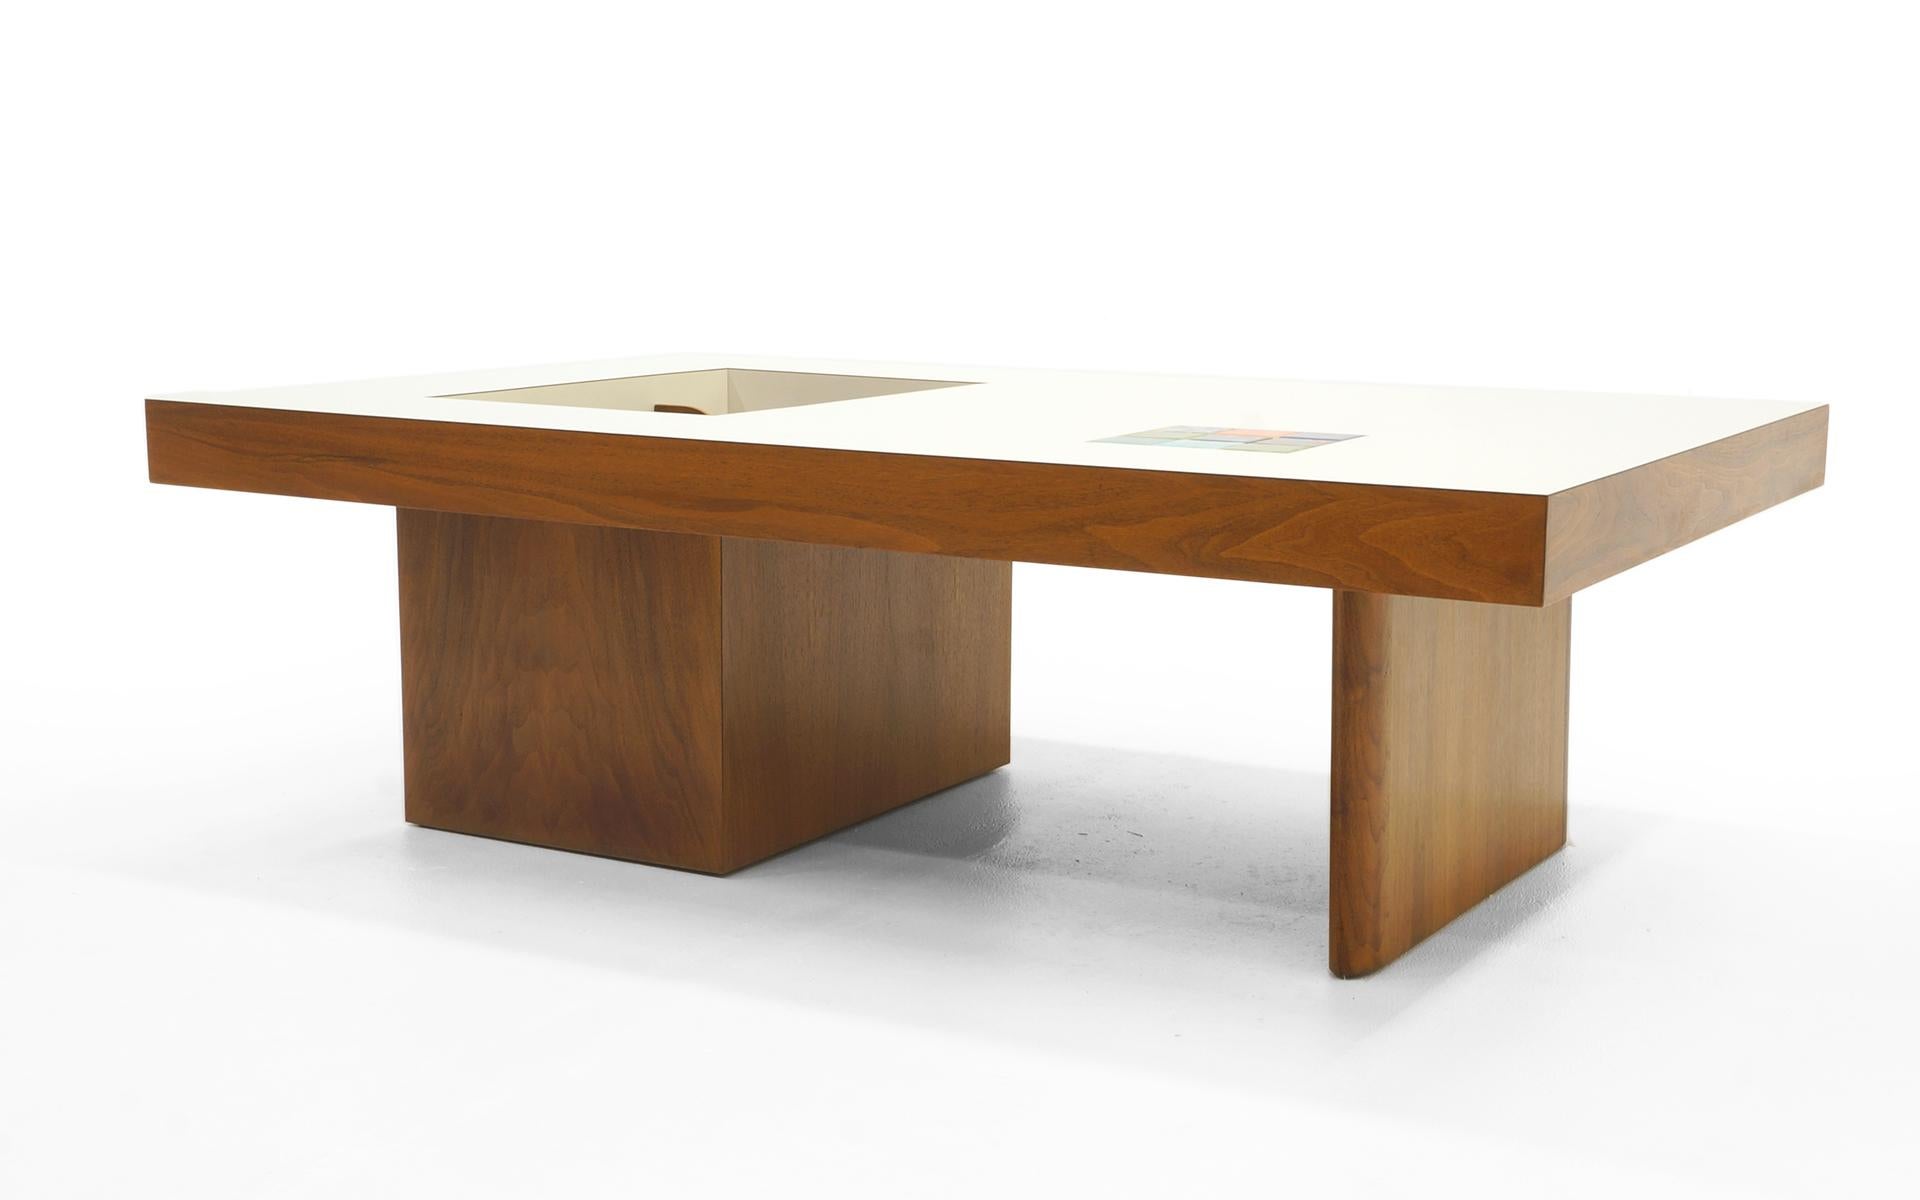 Mid-20th Century Danish Modern Coffee Table with Built in Magazine / Album Storage, Tile Inlay